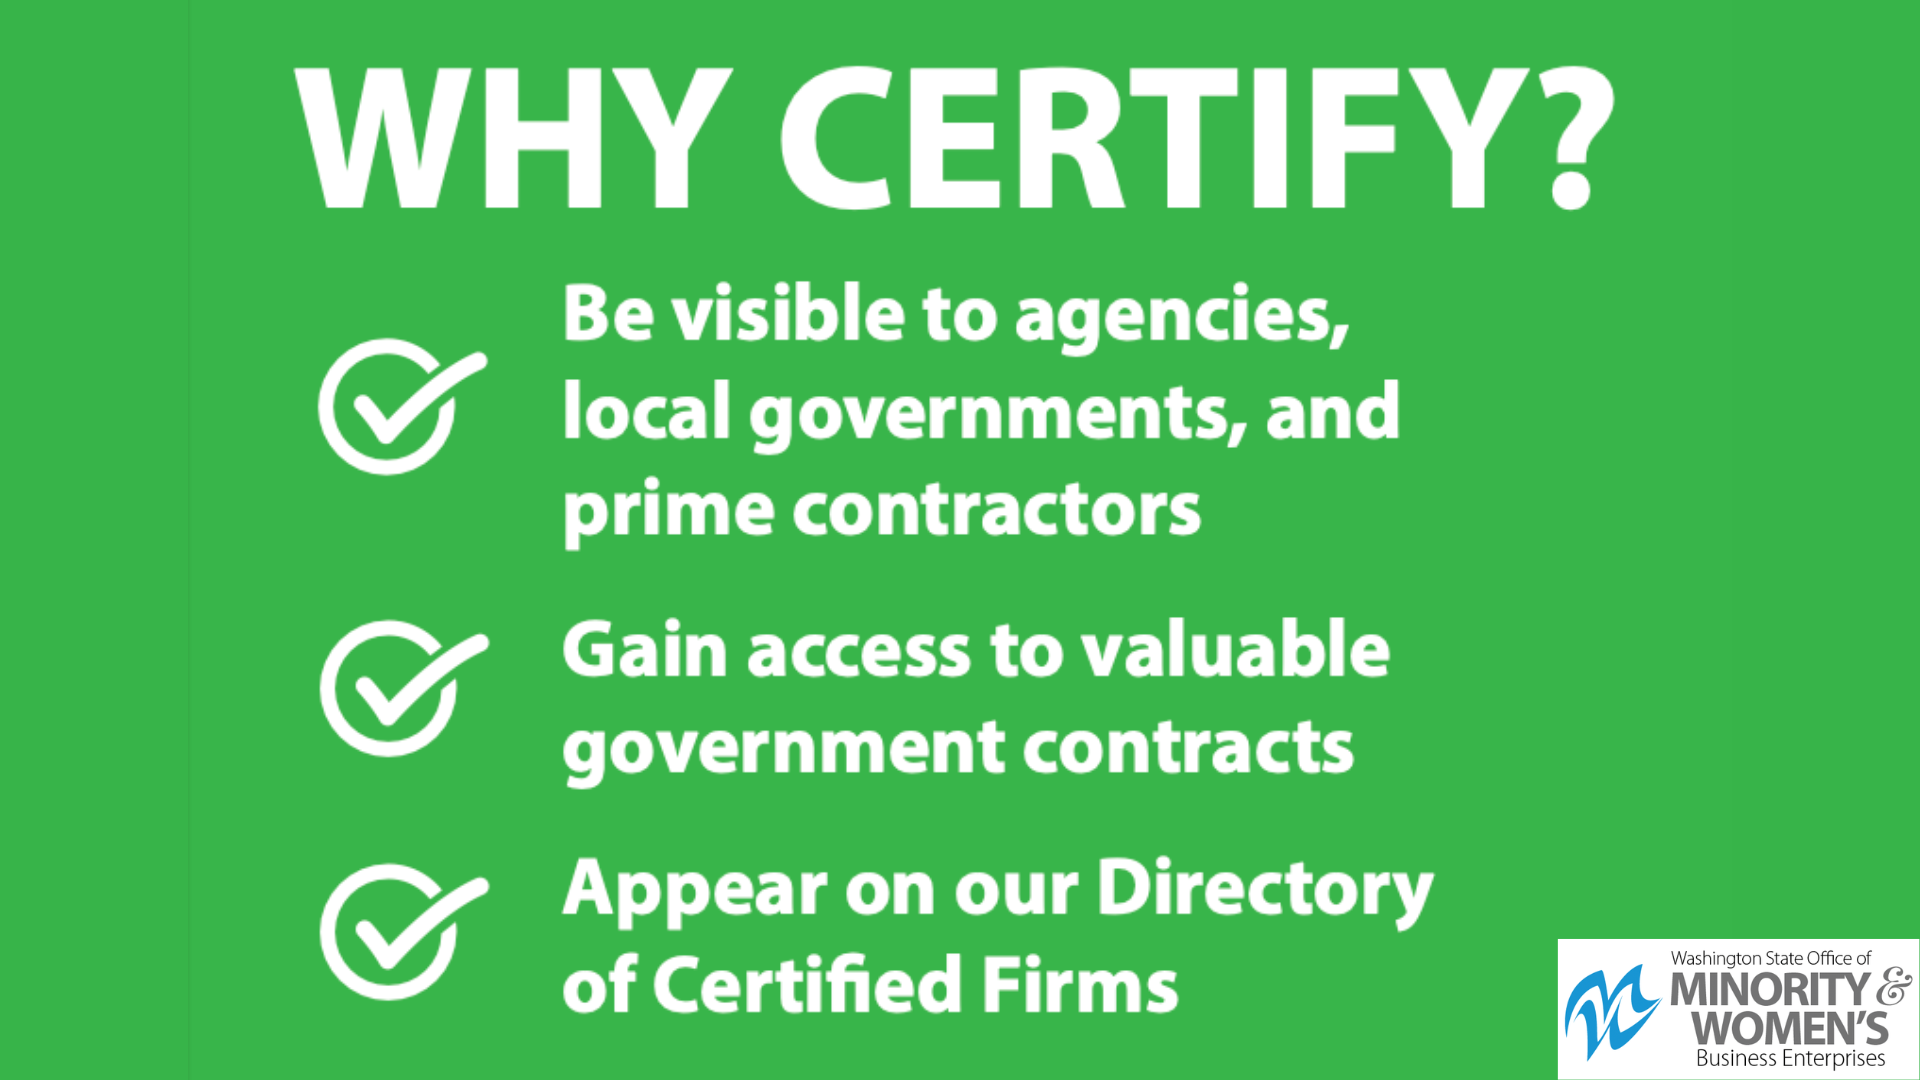 Graphic titled 'Why Certify?' from the Washington State Office of Minority & Women's Business Enterprises. The image lists benefits of certification, including visibility to agencies, local governments, and prime contractors, access to valuable government contracts, and appearance on the Directory of Certified Firms. Includes the organization's logo in the bottom right corner.